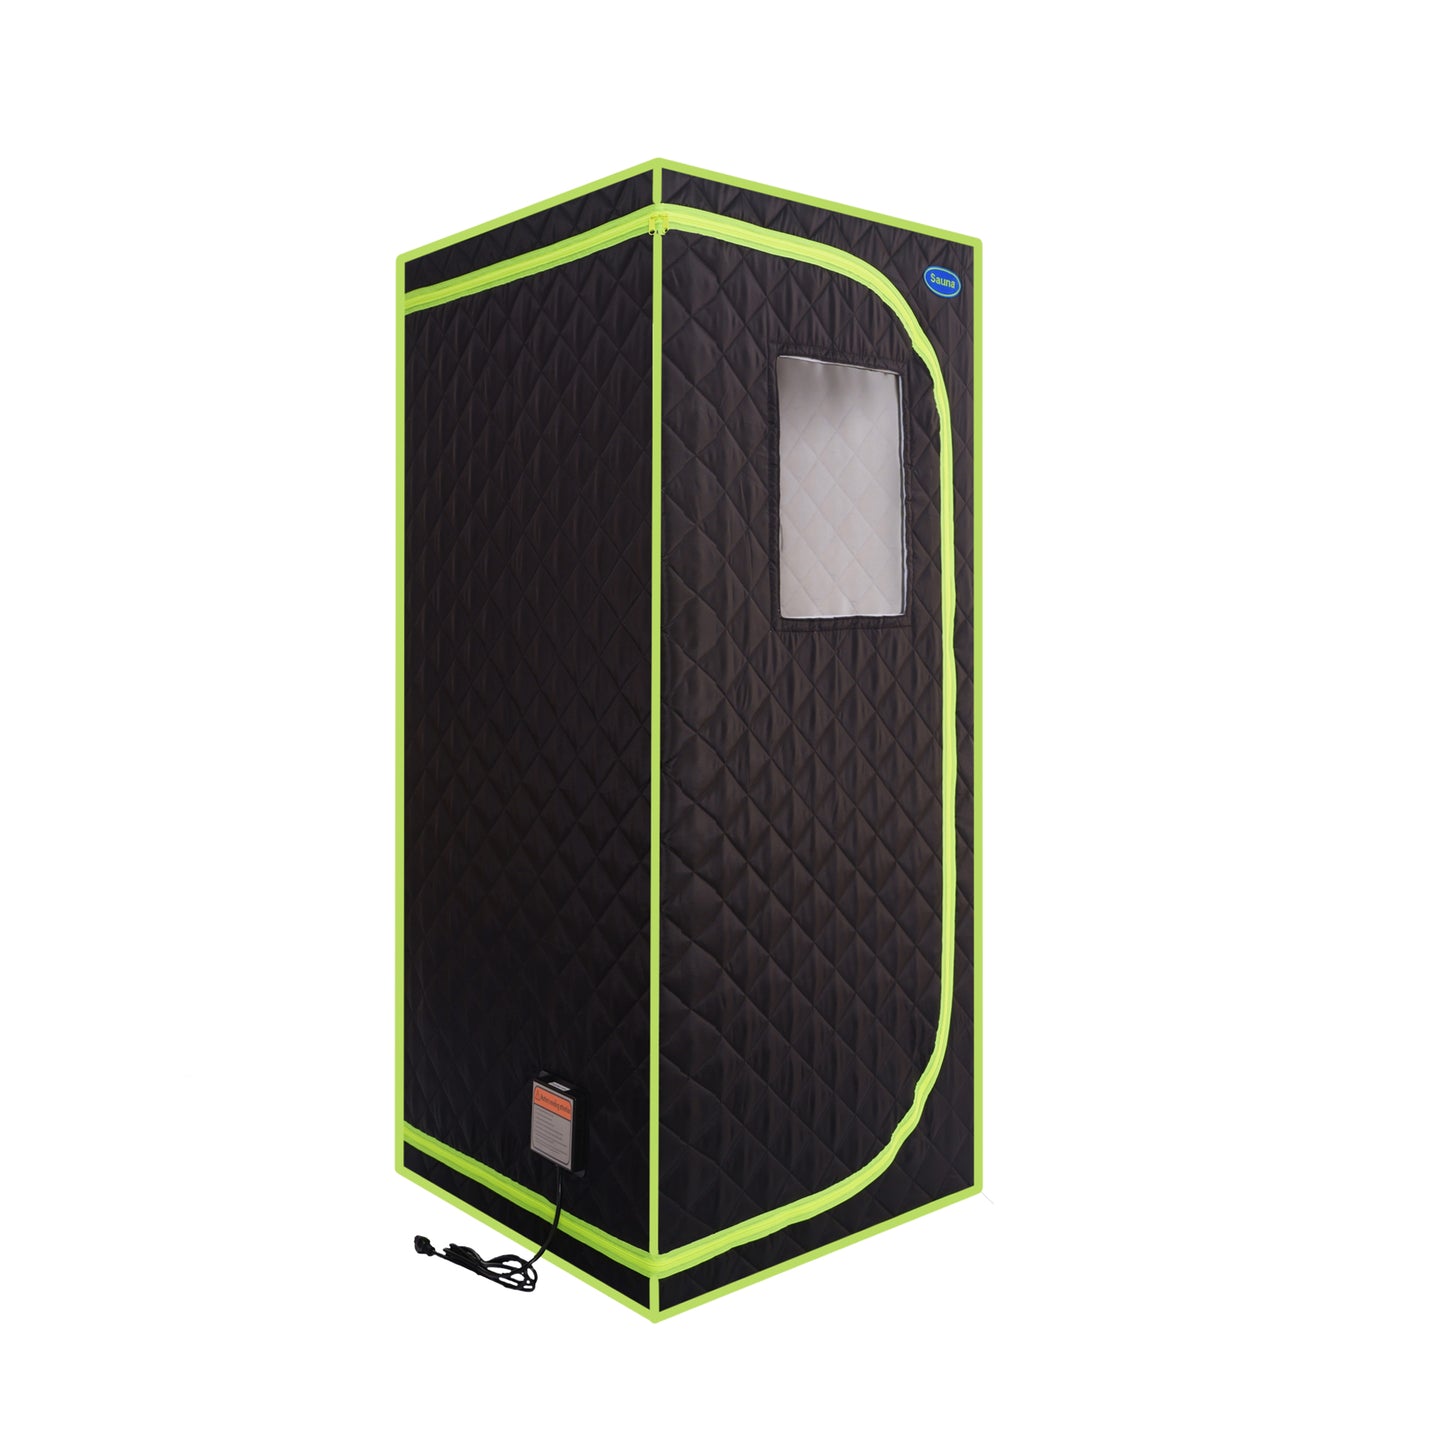 Portable Plus Type Full Size Far Infrared Sauna tent. Spa, Detox, Therapy and Relaxation at home.Larger Space, Stainless Steel Pipes Connector Easy to Install, with FCC Certification--Black